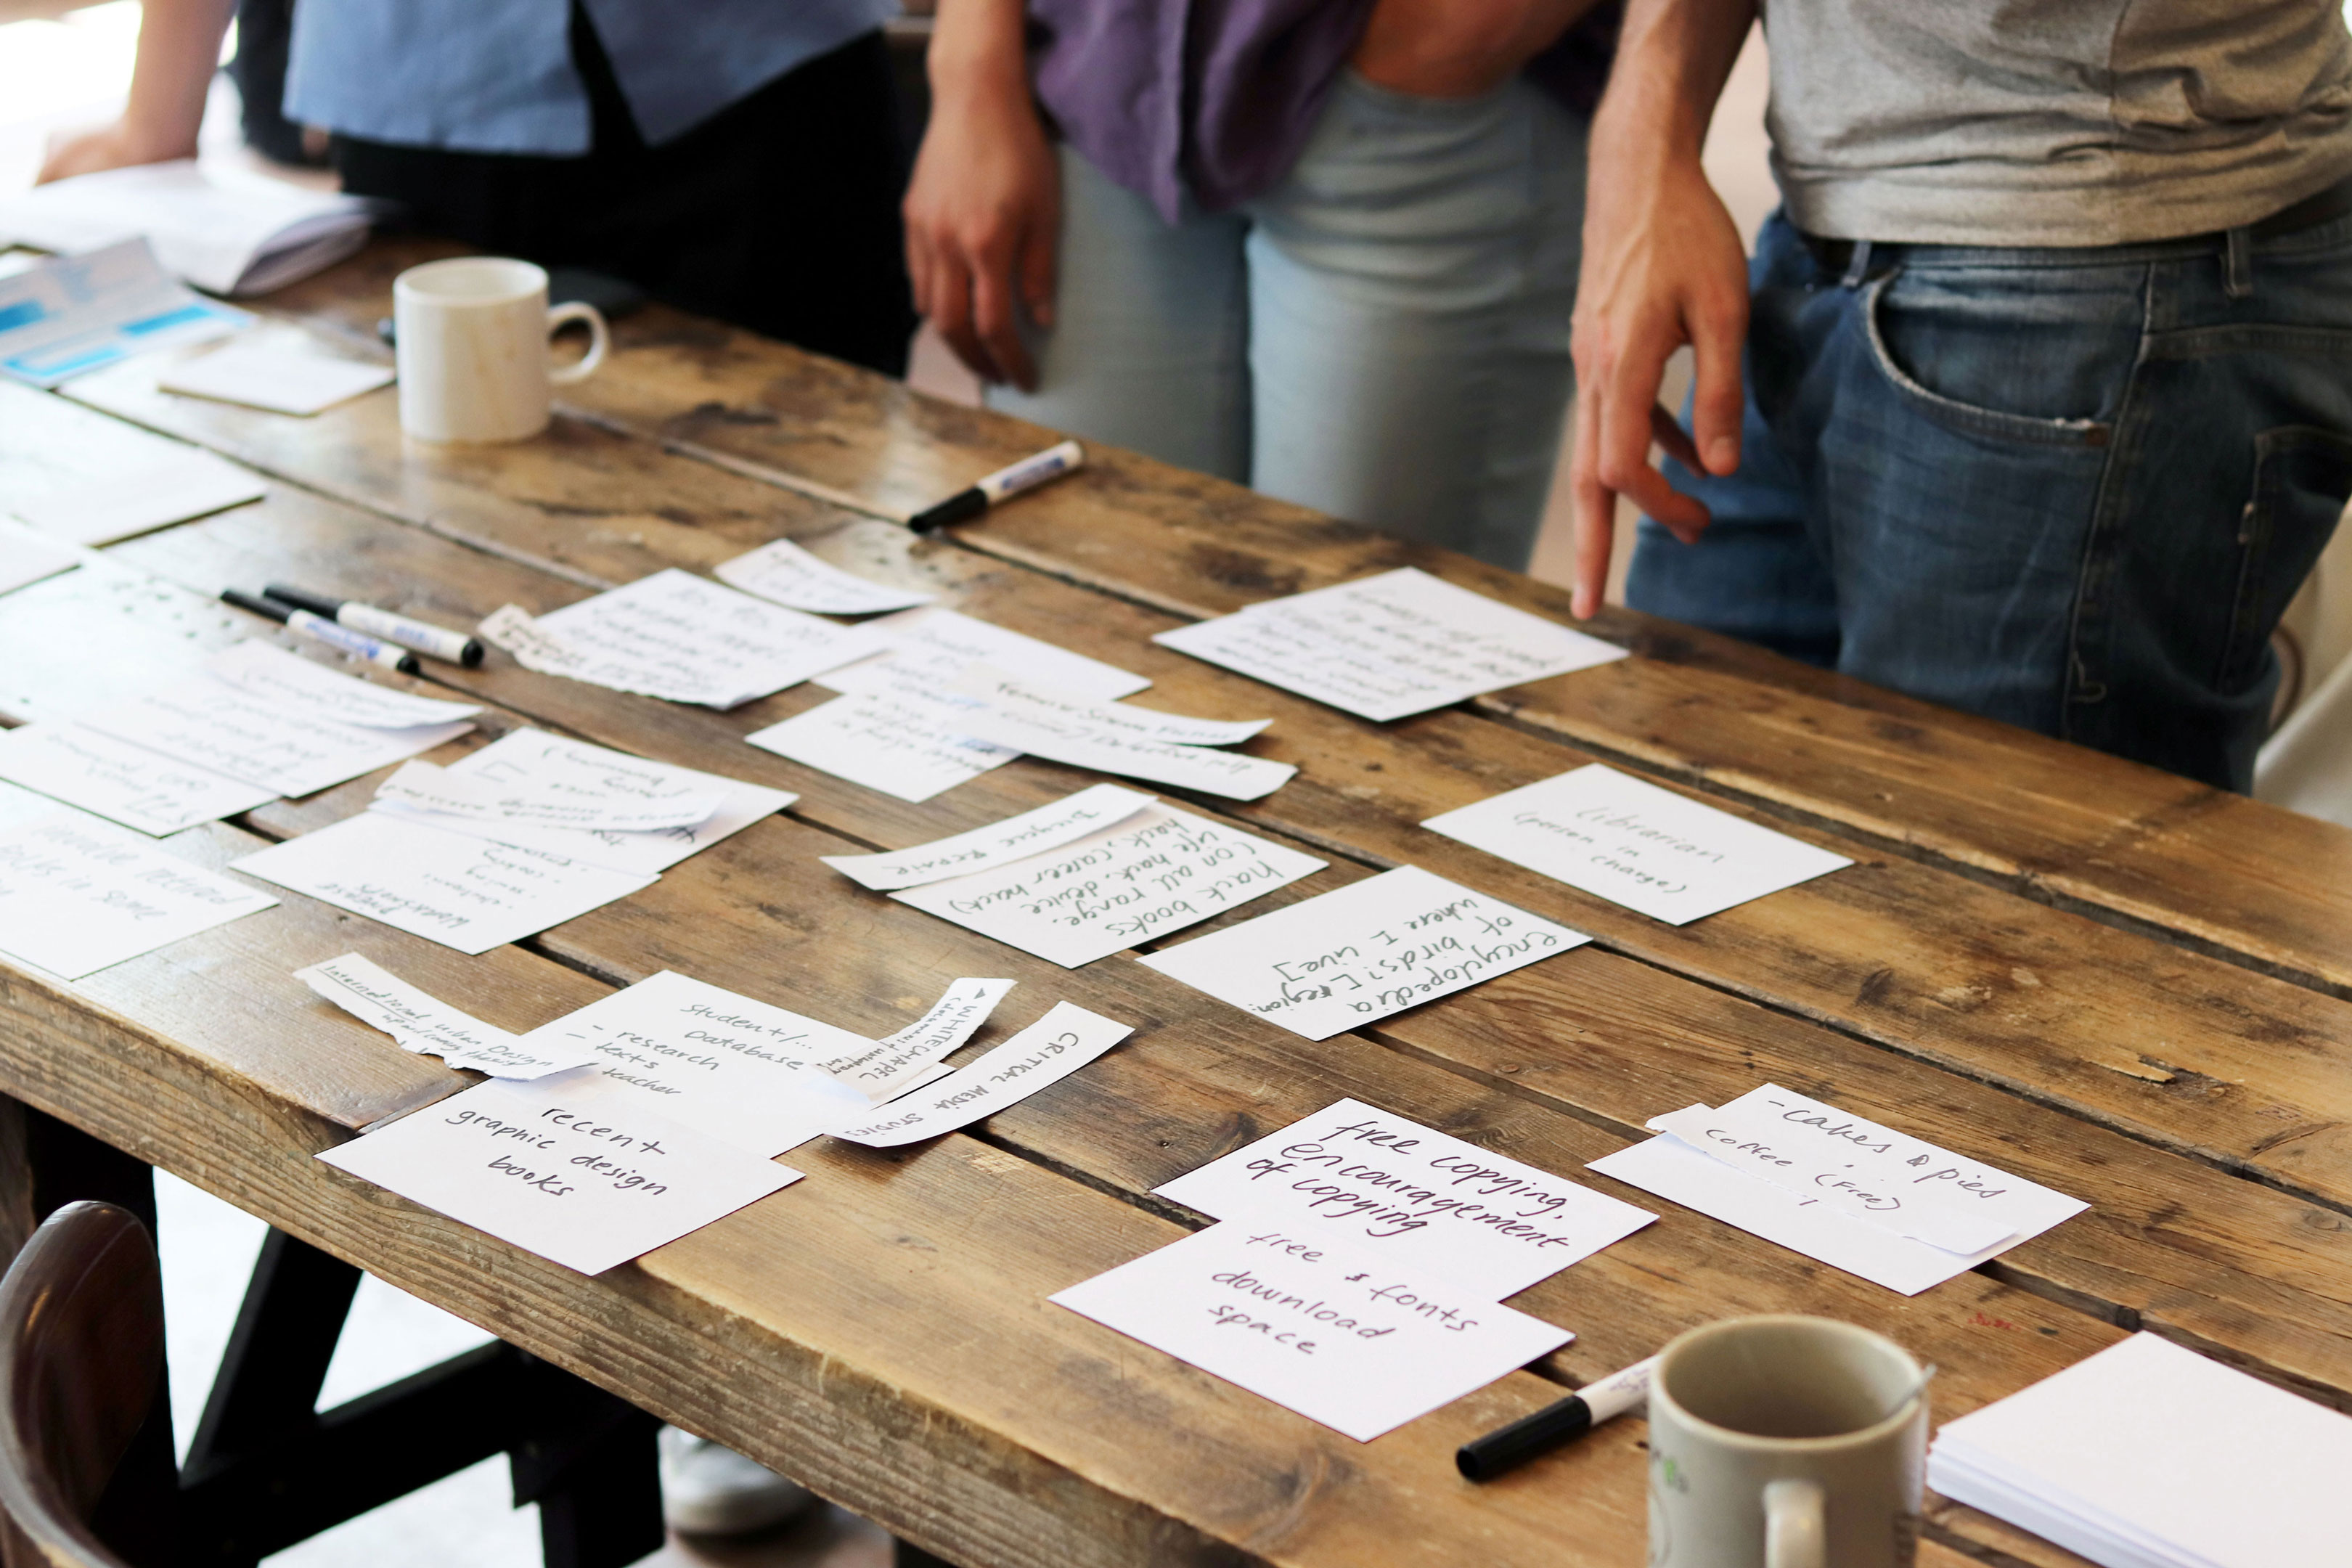 Hand-written papers showing the outcome of user research